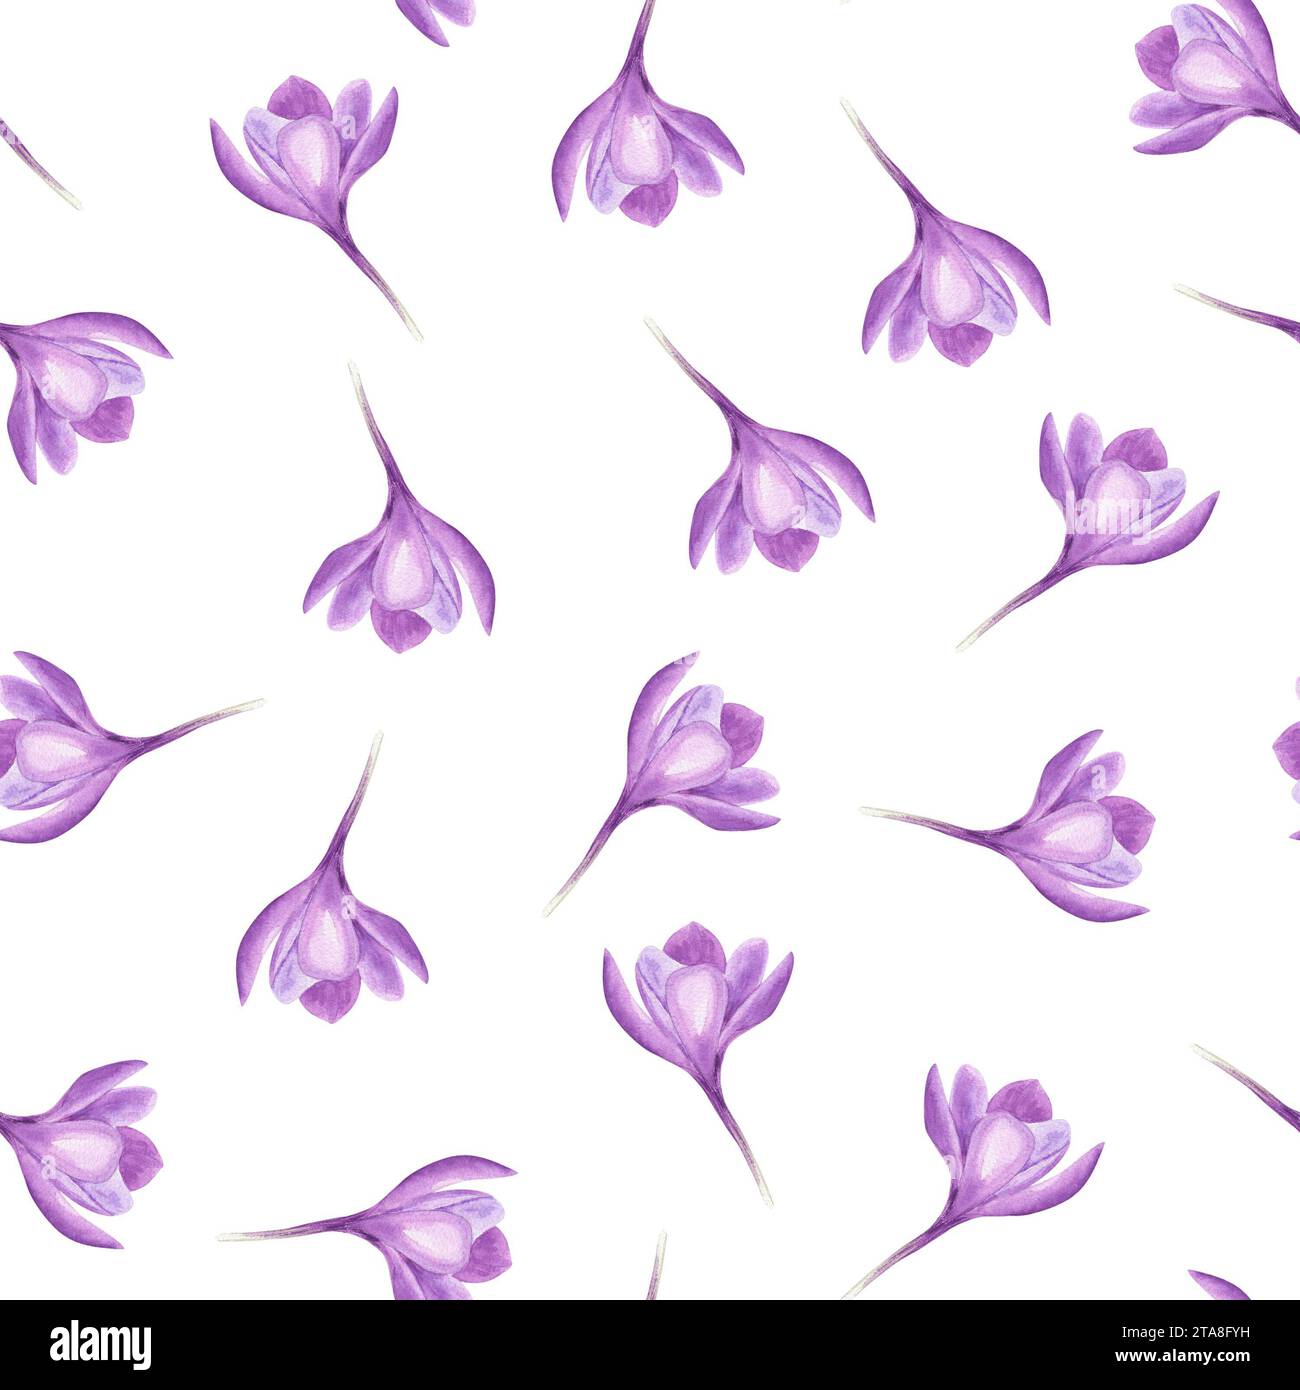 Ornate of spring crocuses. Saffron flowers. Wildflowers. Seamless pattern. Watercolor illustration for the design of textile, wrapping paper Stock Photo